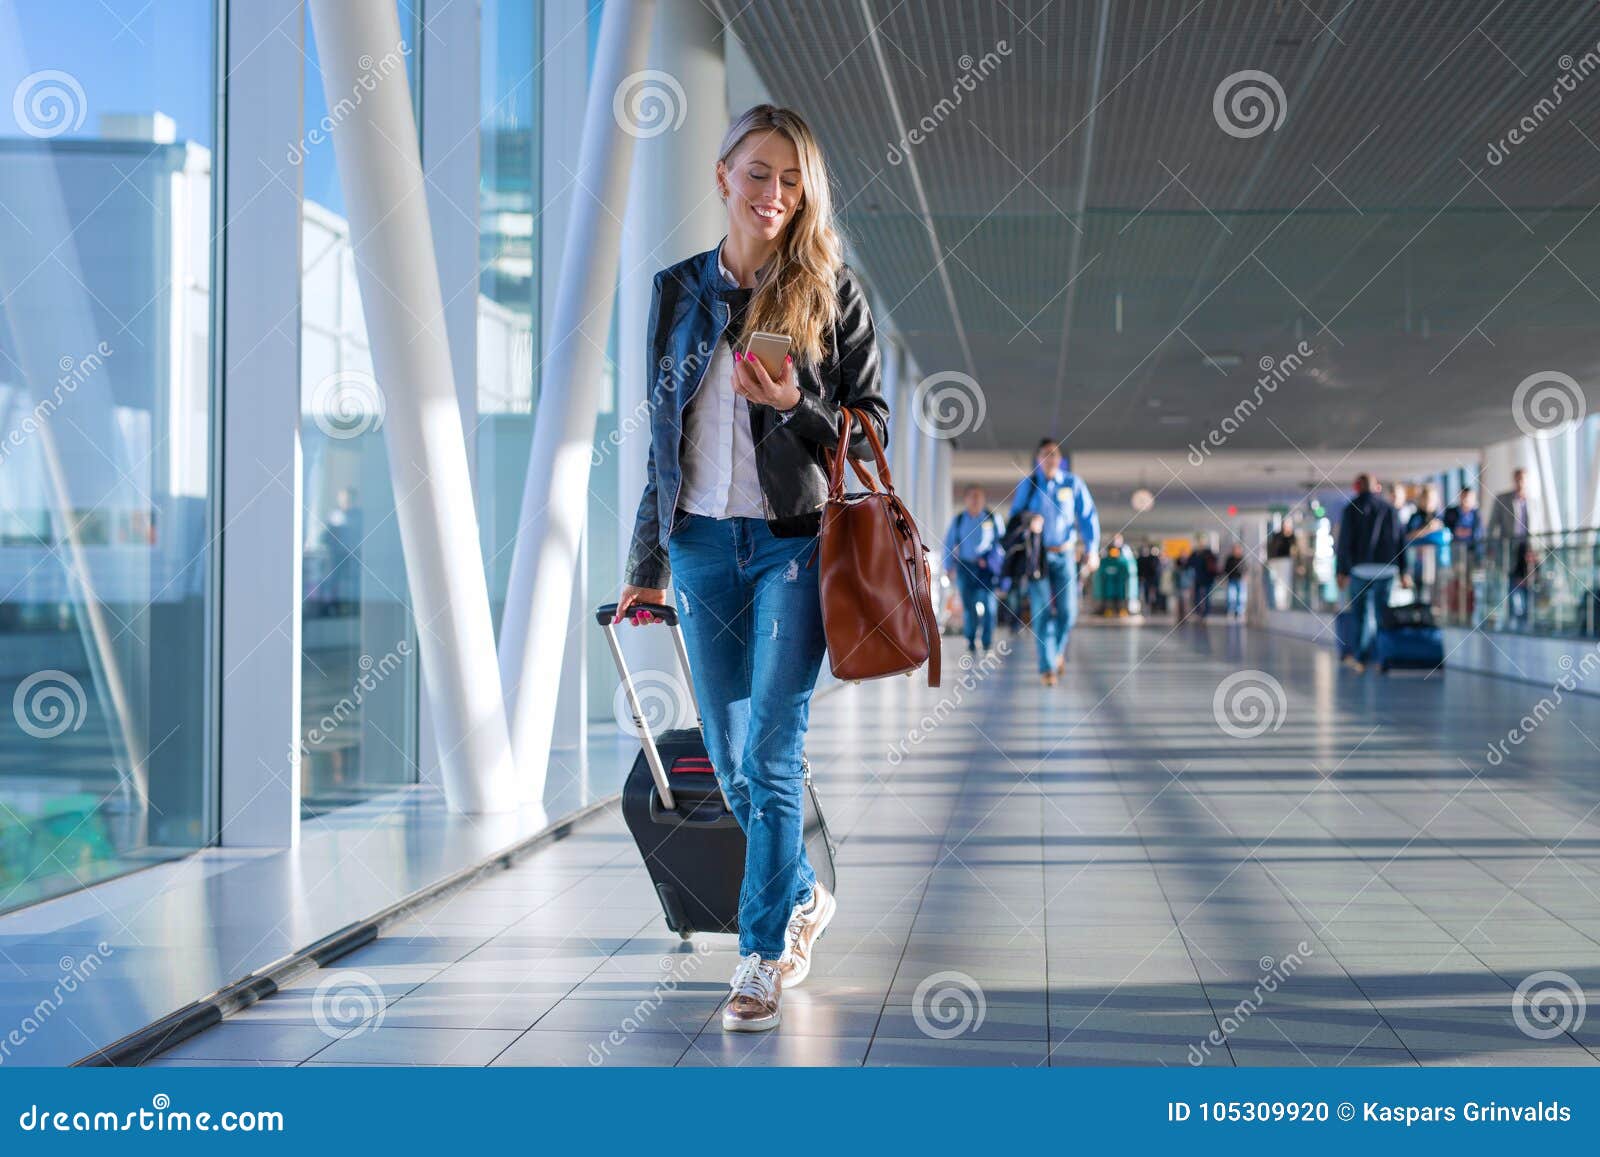 happy woman travelling and walking in airport